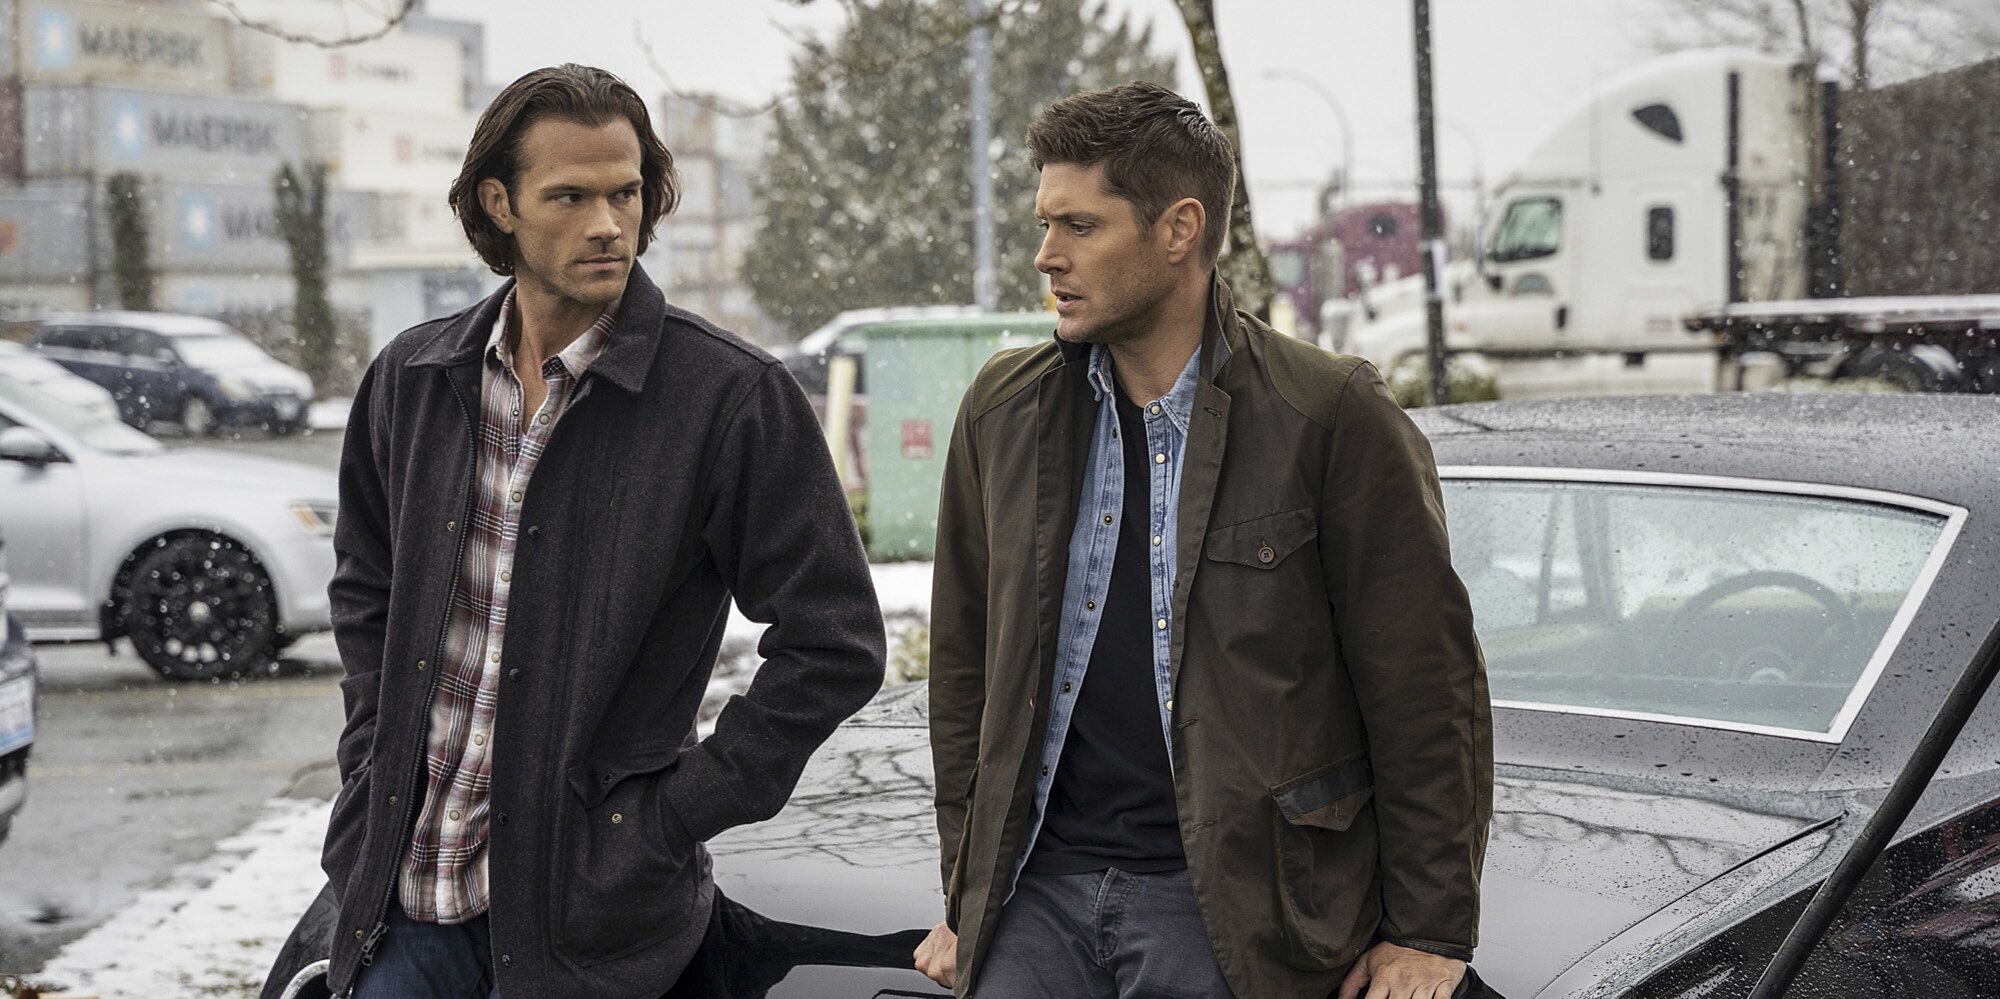 Jared Padalecki says ‘things are good’ with Jensen Ackles after Supernatural prequel beef